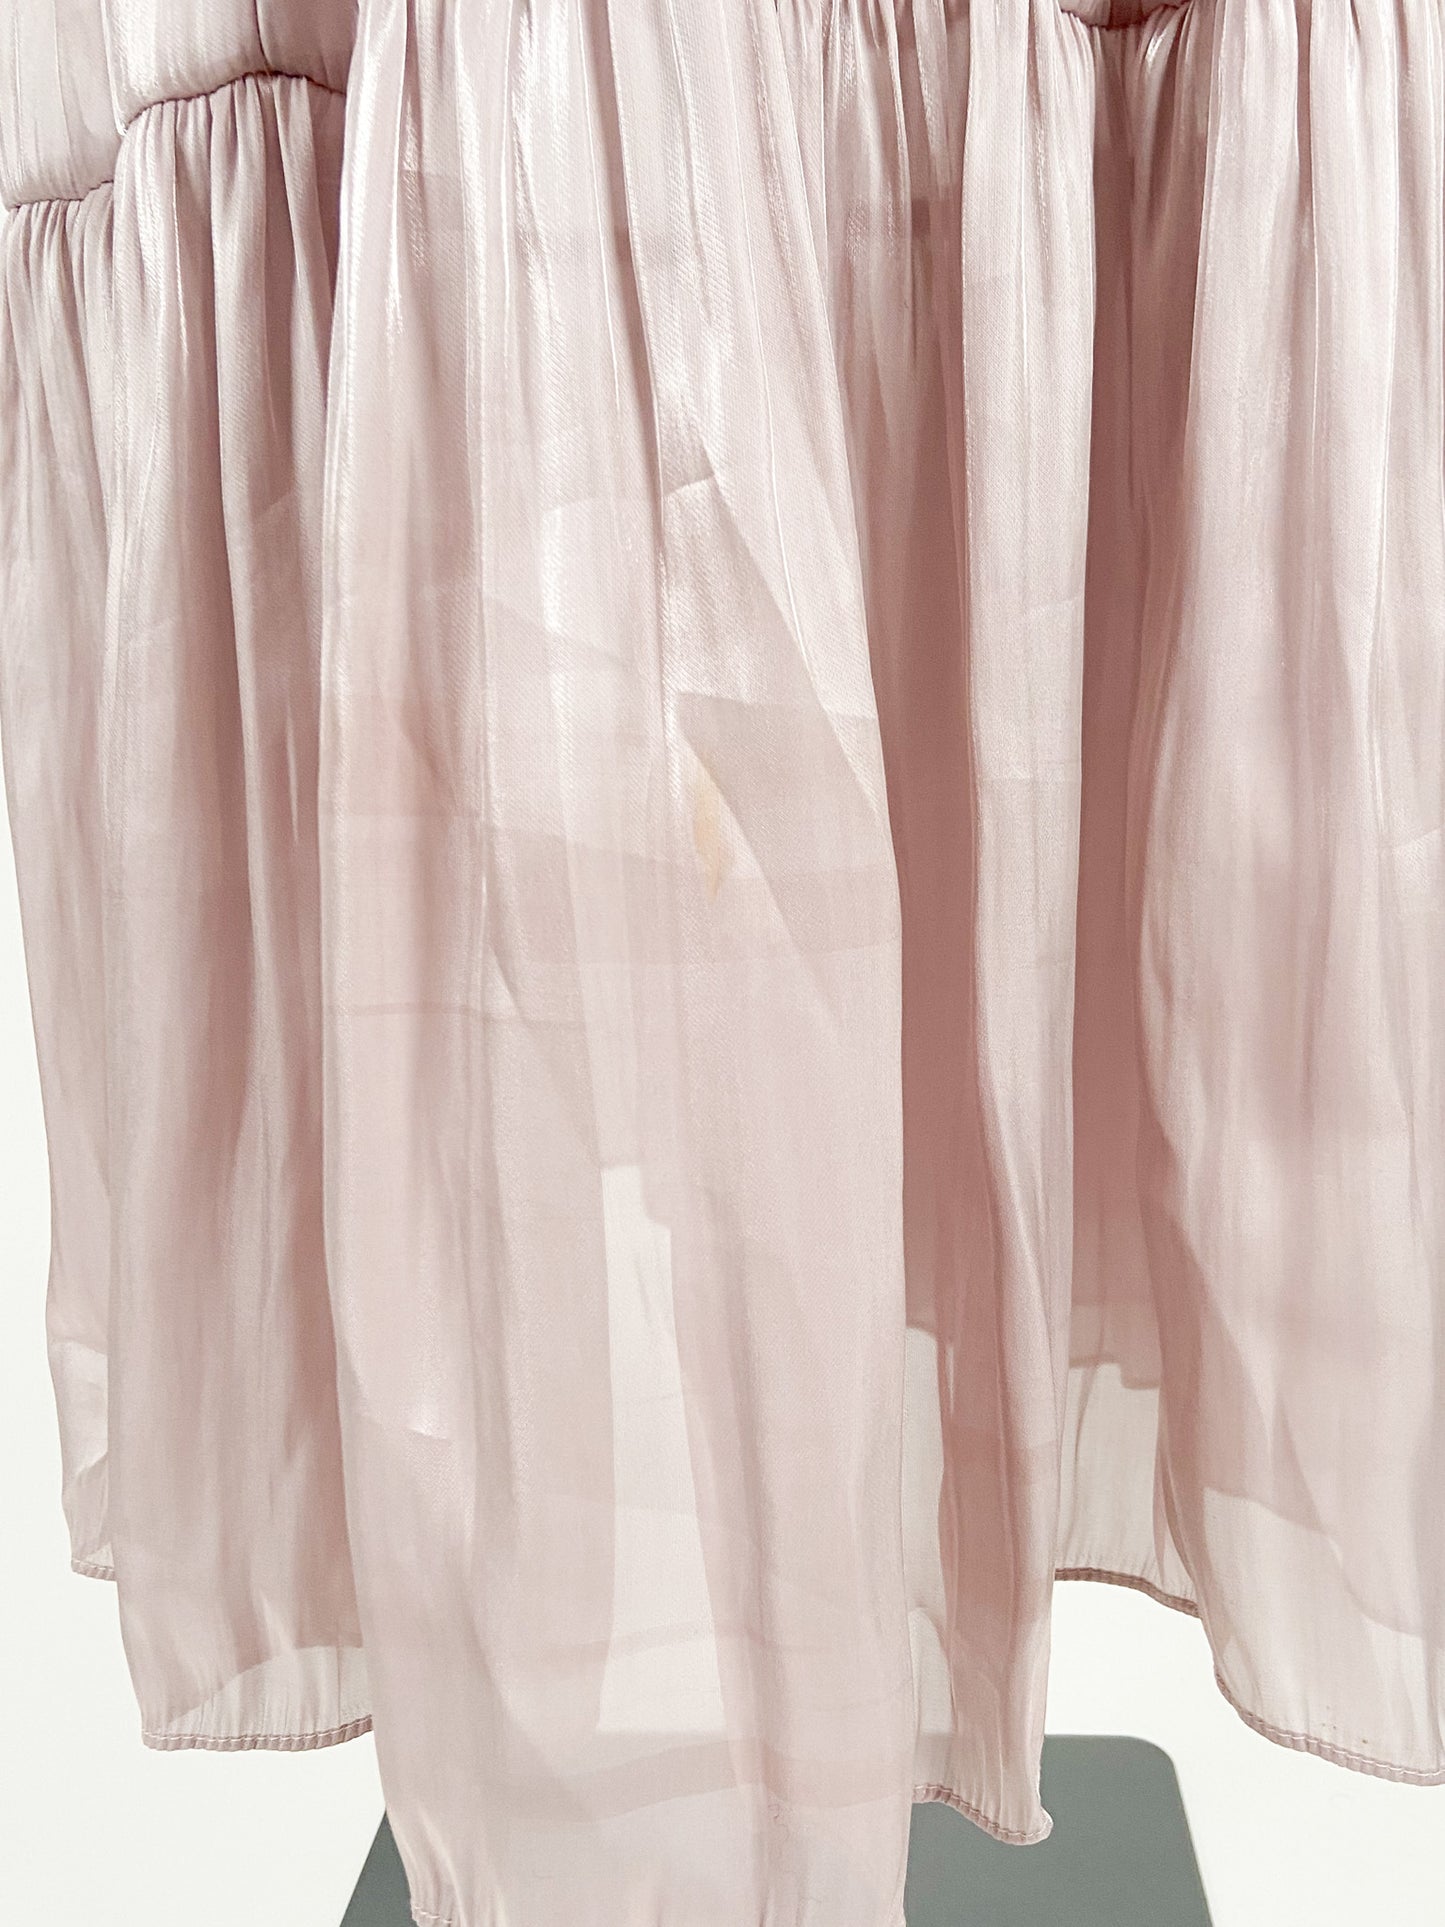 Olivia | Pink Casual/Workwear Skirt | Size S